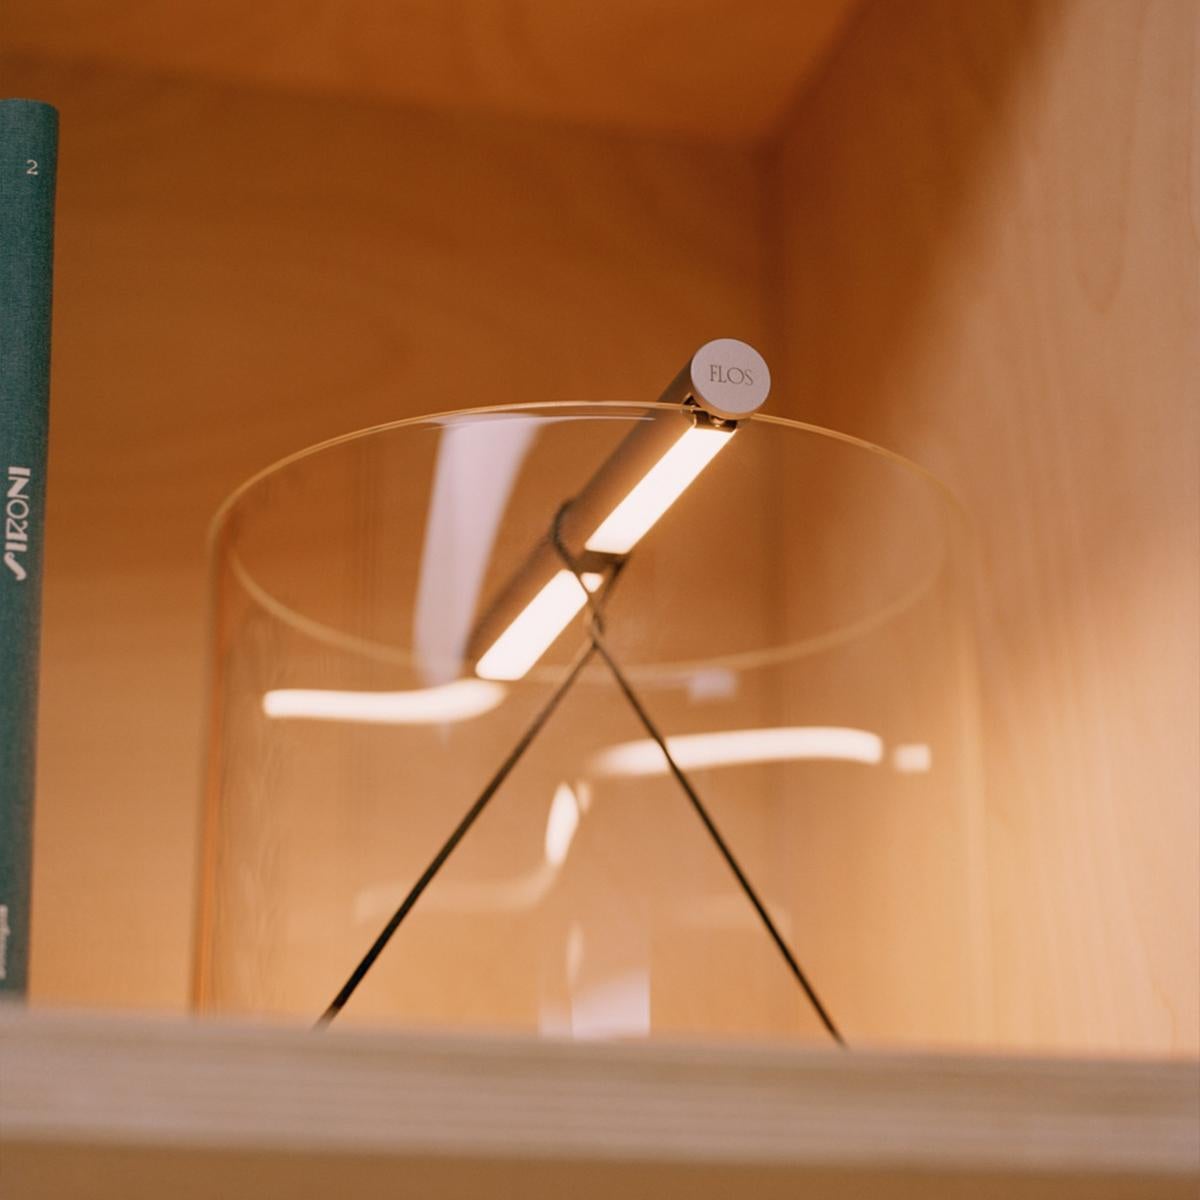 Flos To-Tie T3 Table Lamp in Anodized Natural by Guglielmo Poletti 1